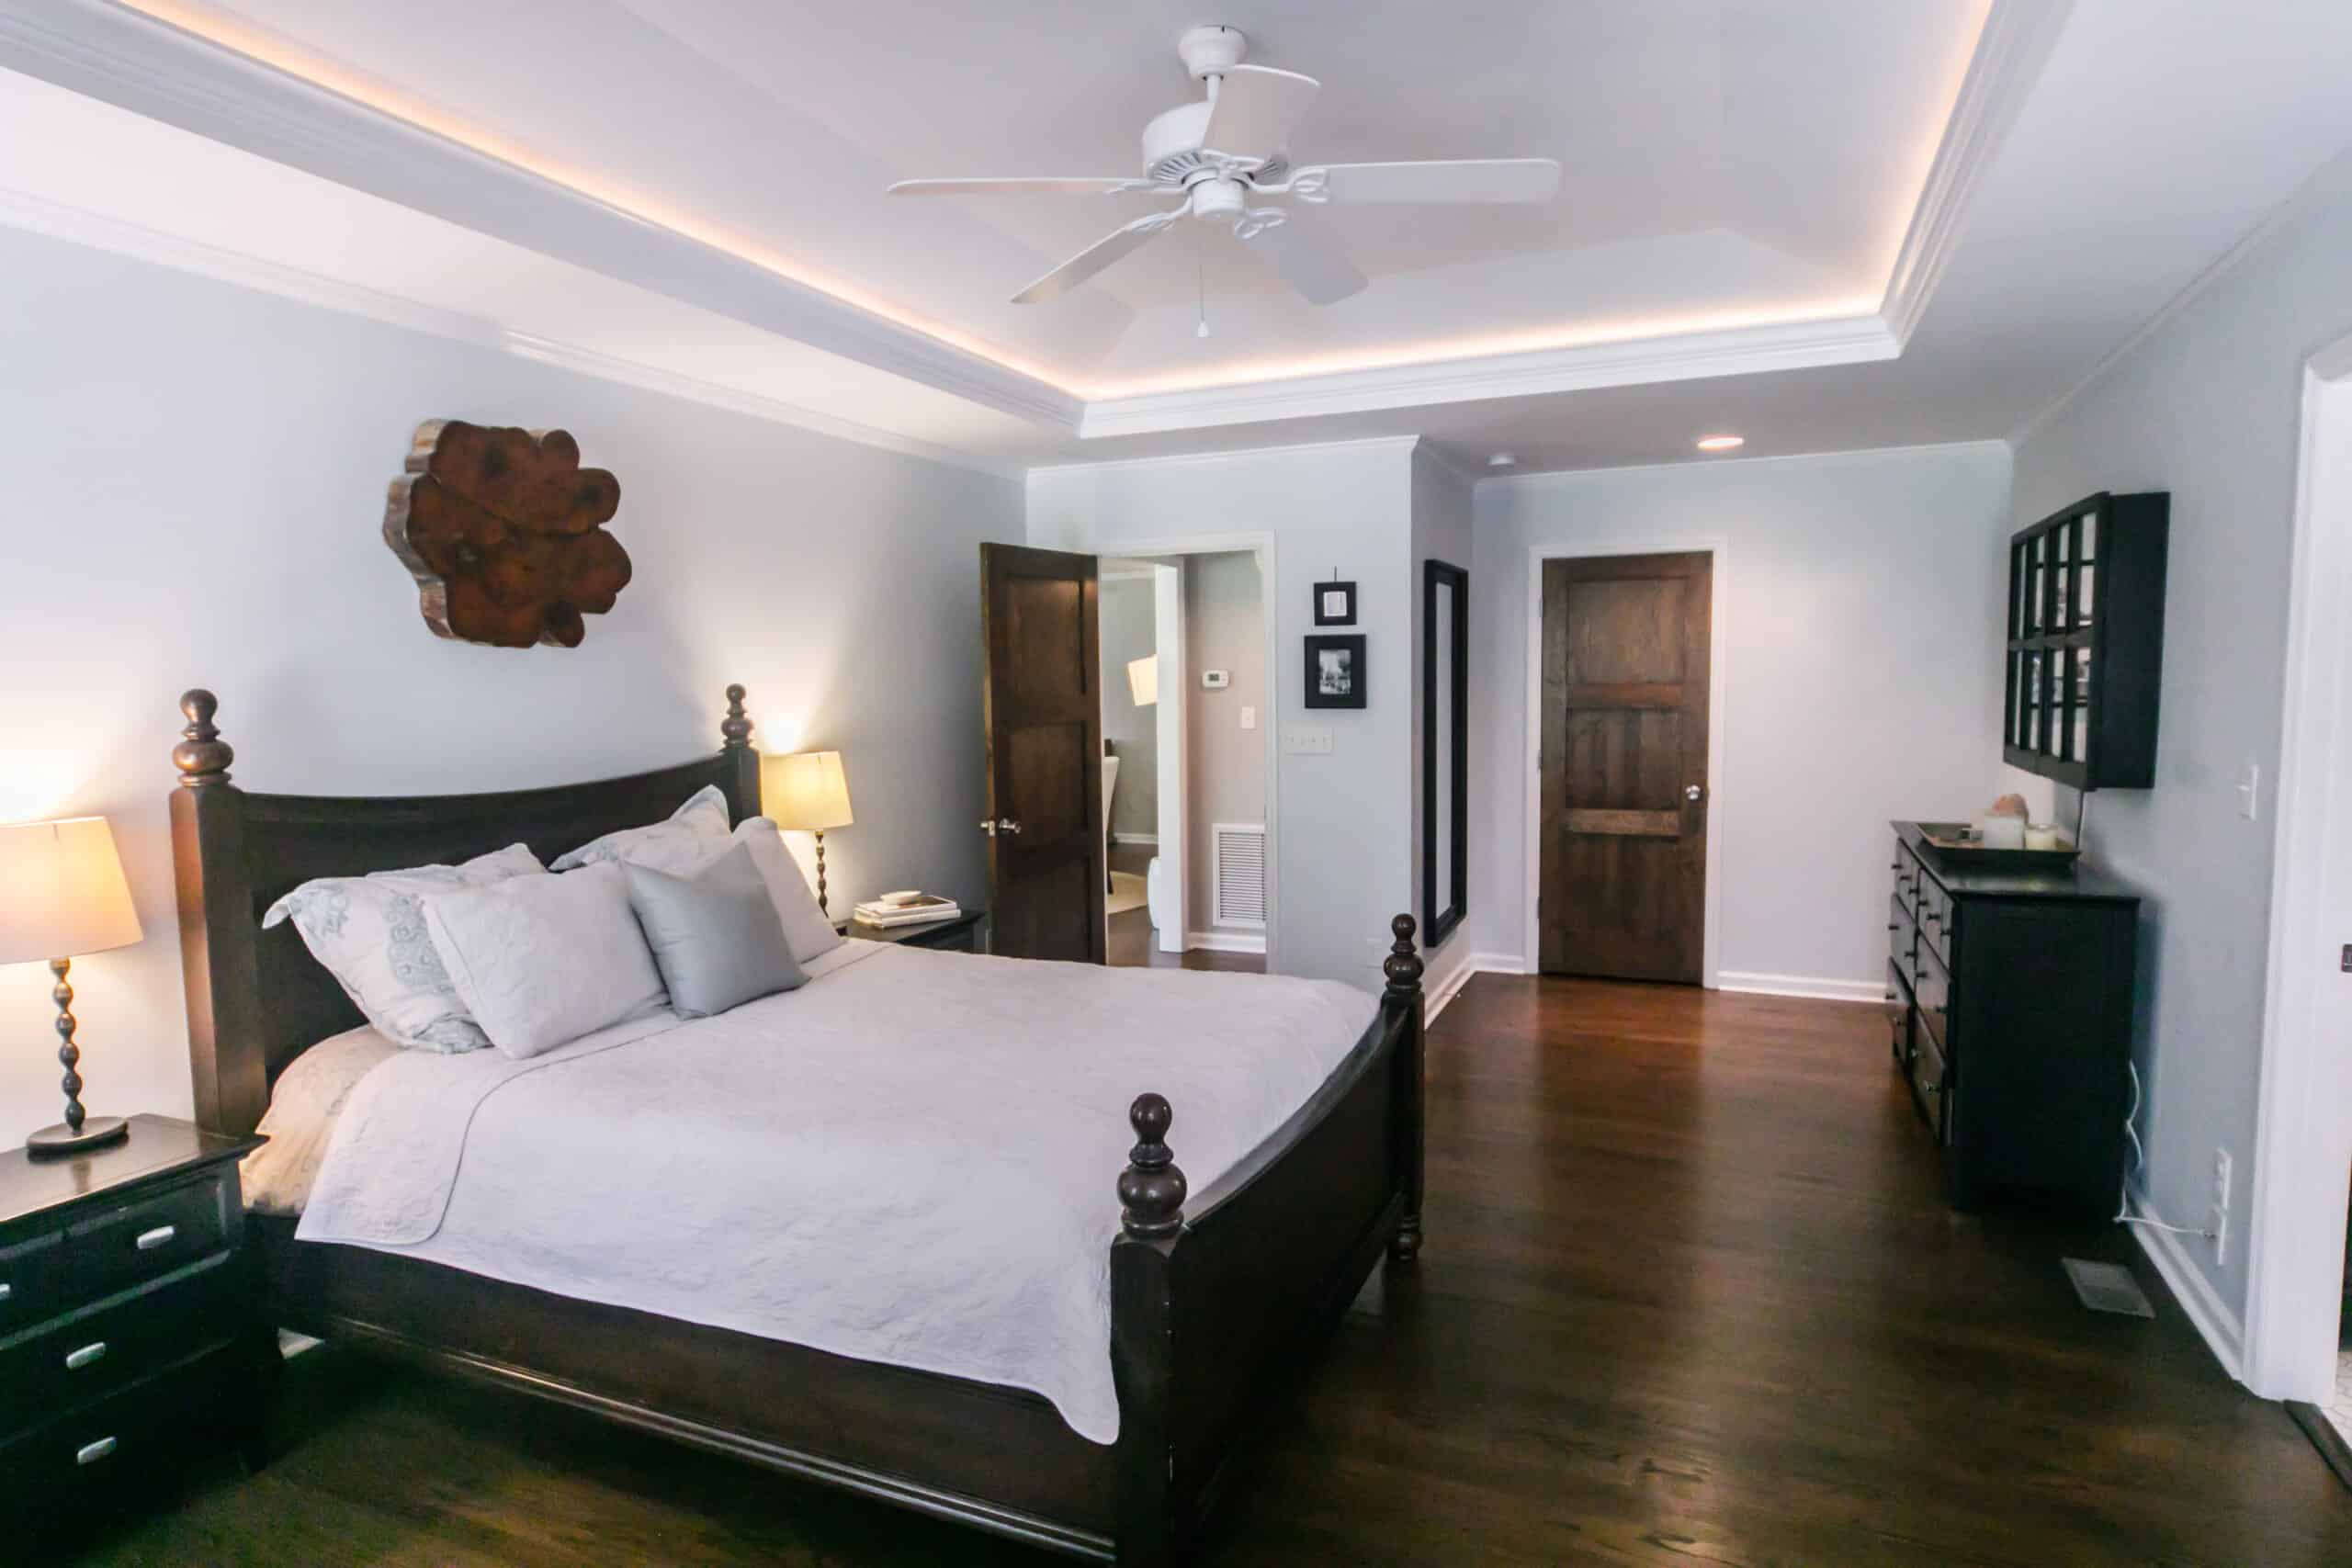 Master bedroom with king size bed and tray ceilings with up light